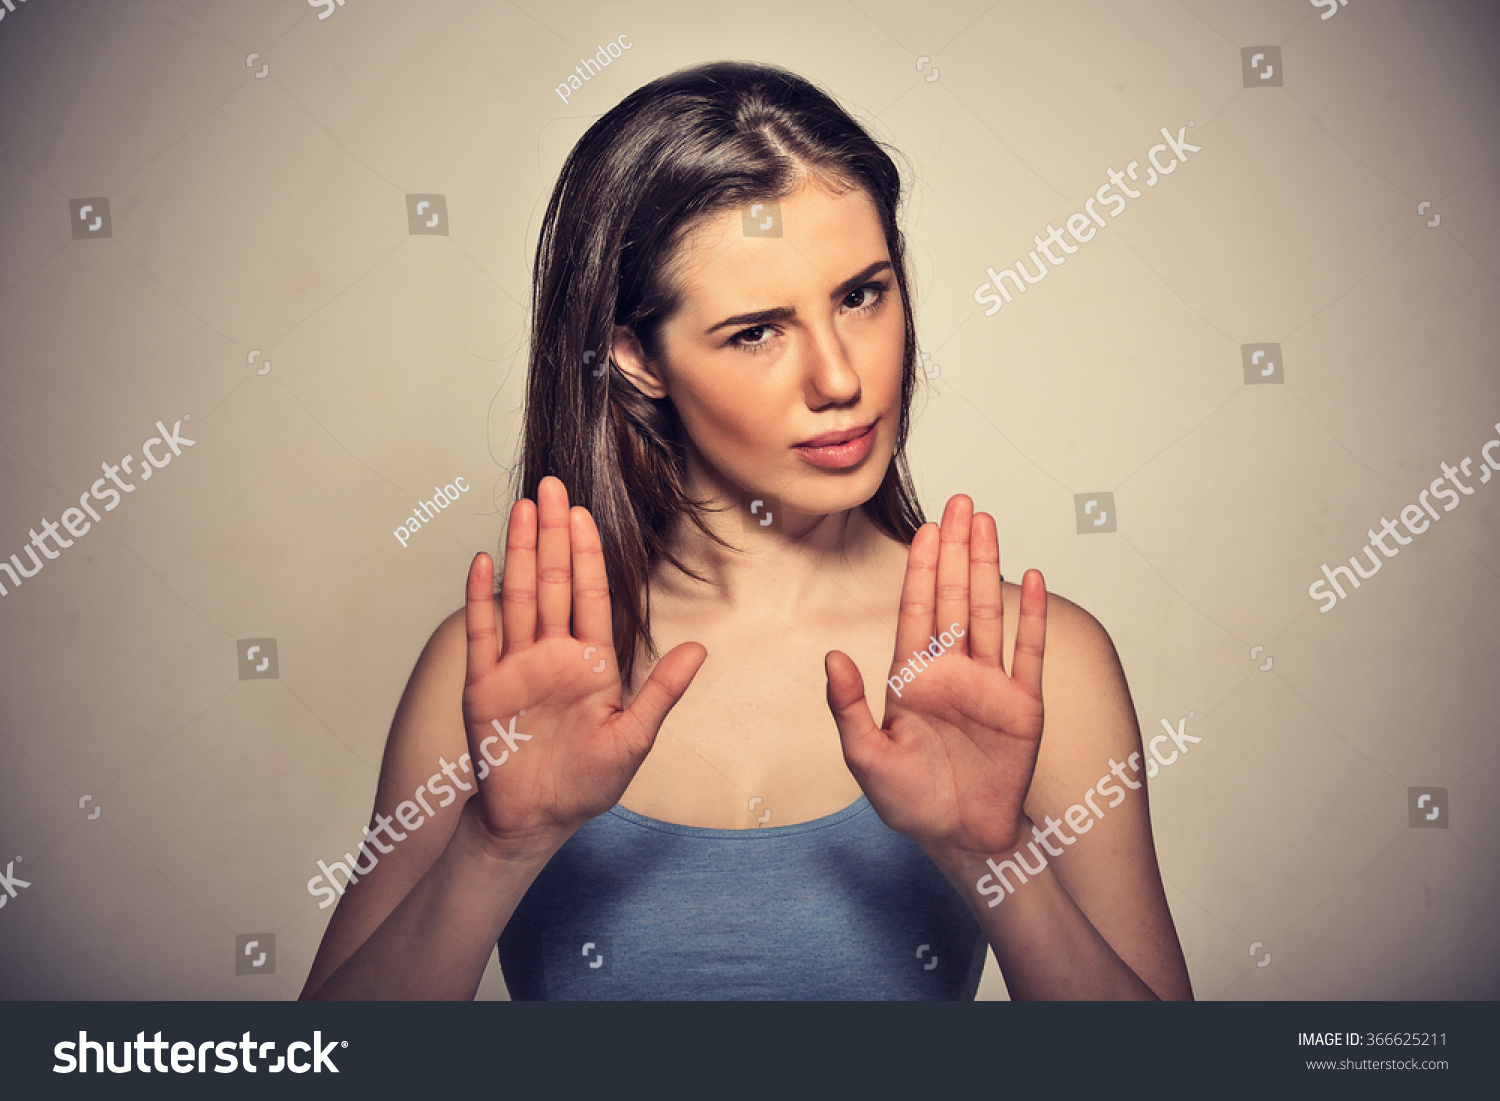 Closeup portrait young annoyed angry woman with bad attitude gesturing with palms outward to stop isolated on grey wall background. Negative human emotion face expression feeling body language #366625211